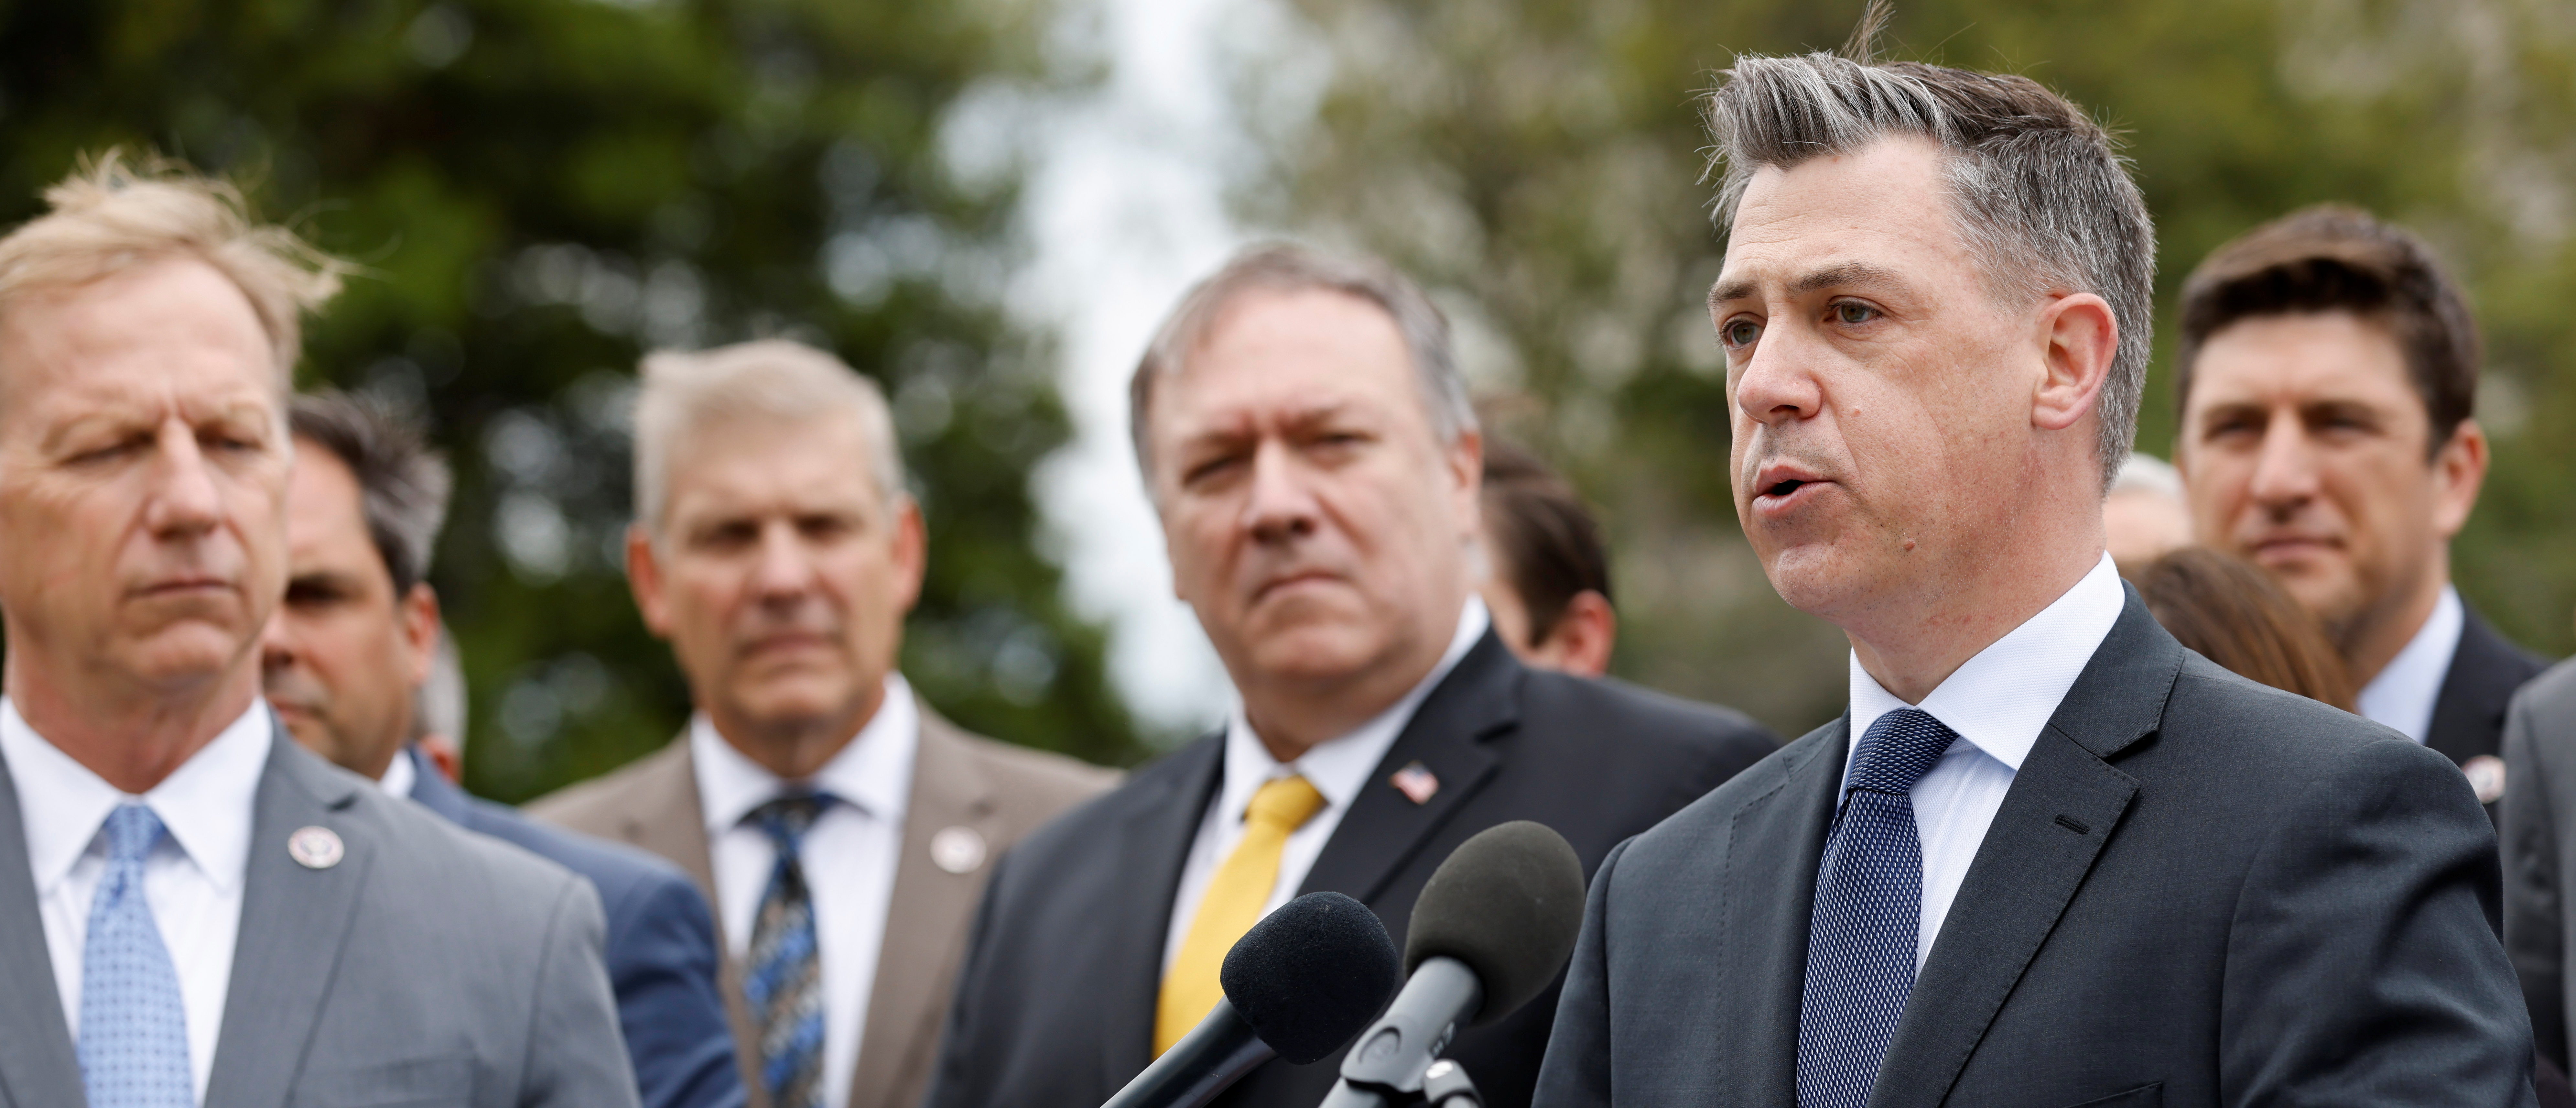 Republican Study Committee Chairman U.S. Rep. Jim Banks (R-IN), joined by former Secretary of State Mike Pompeo, holds a news conference on the U.S. posture towards Iran’s nuclear program, at the U.S. Capitol in Washington, U.S. April 21, 2021. 